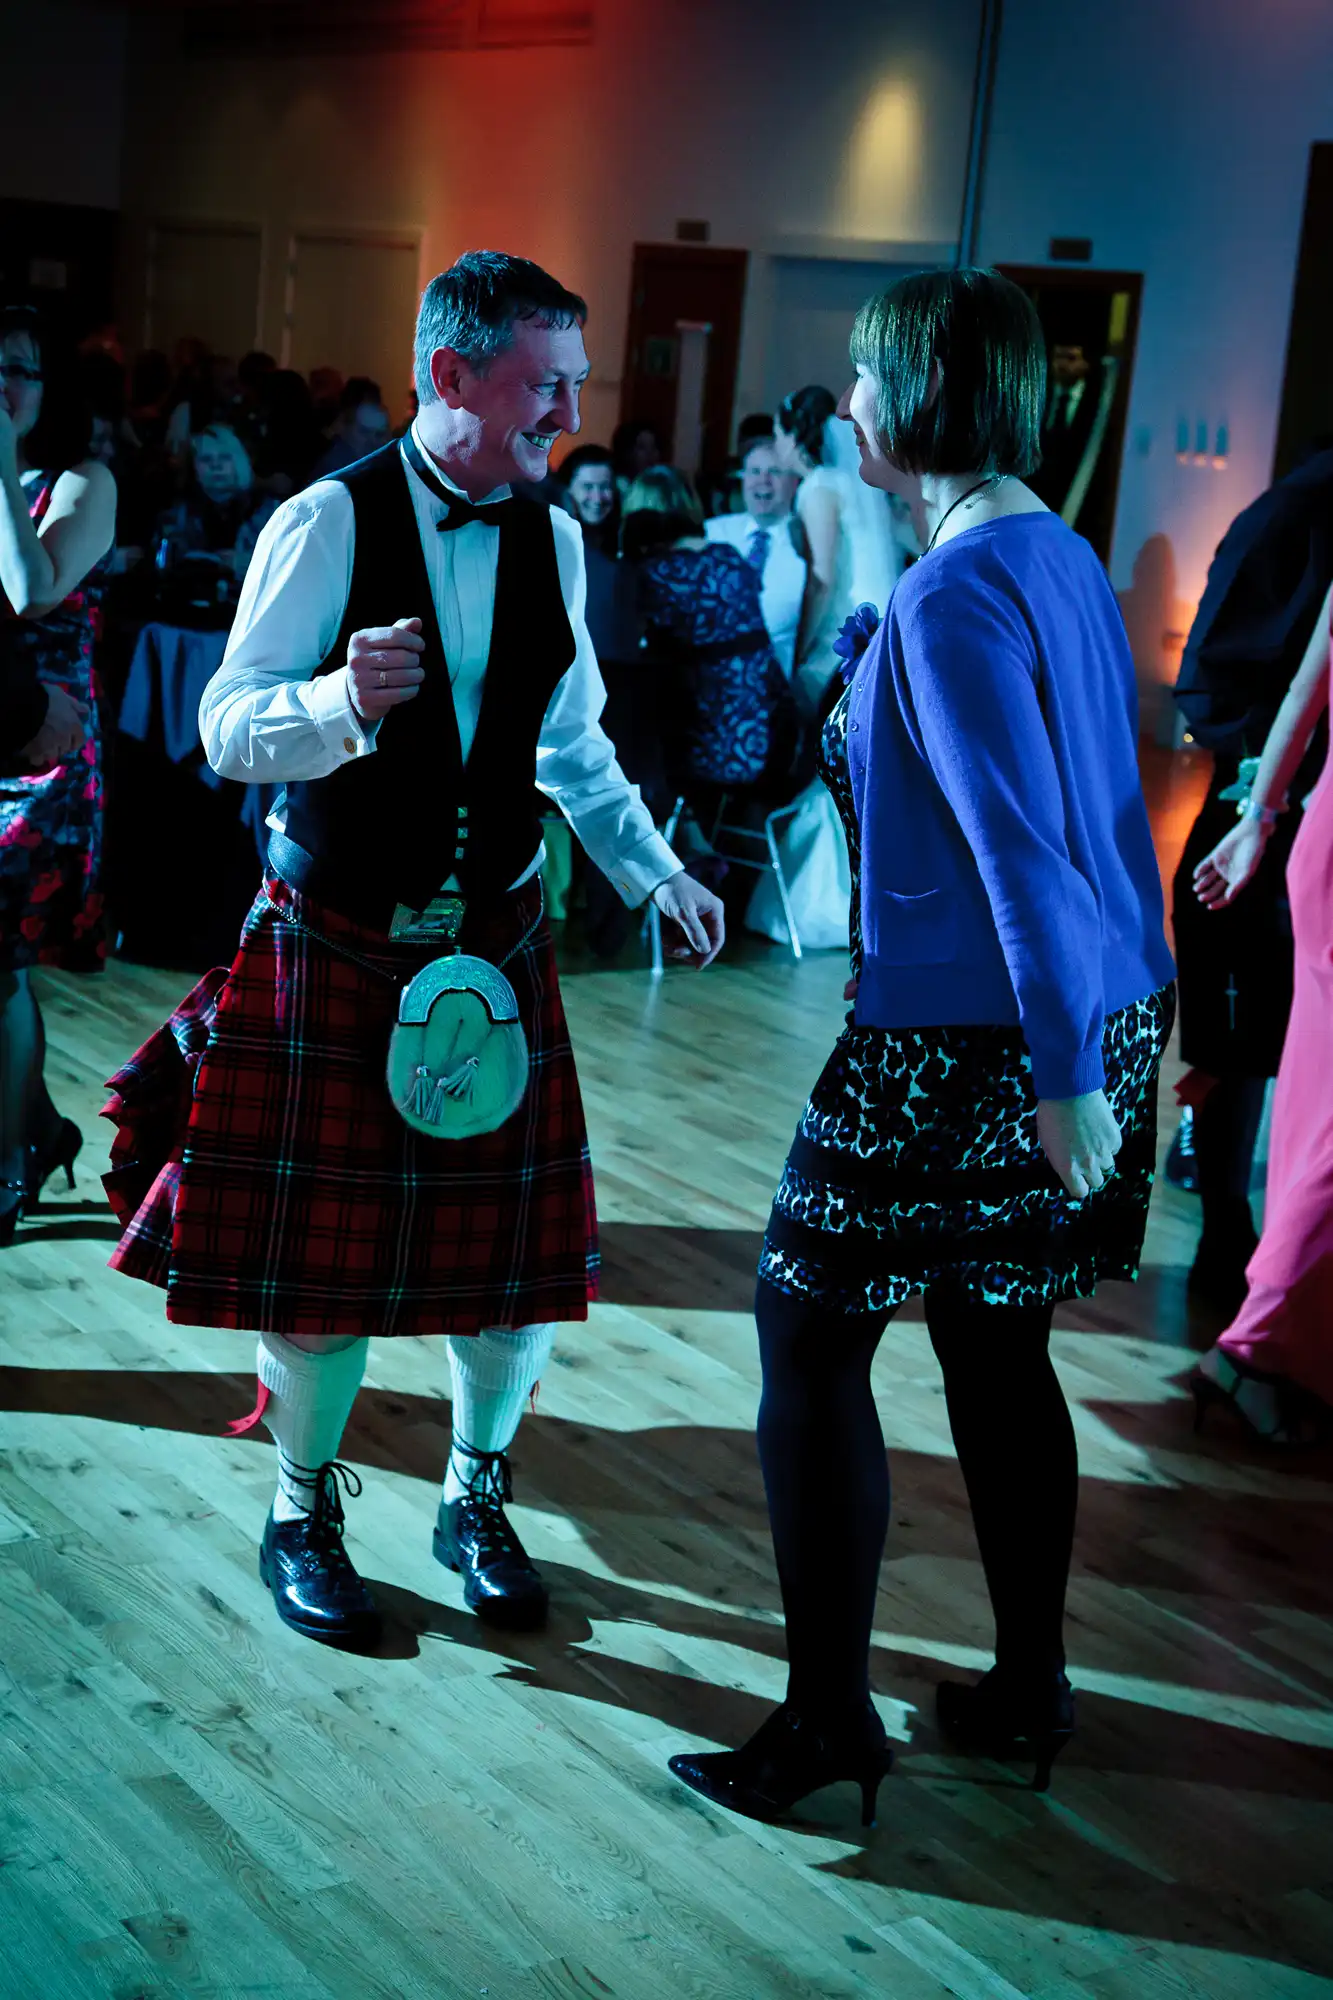 A man in a kilt dances with a woman in a black dress at a lively event with people in the background.